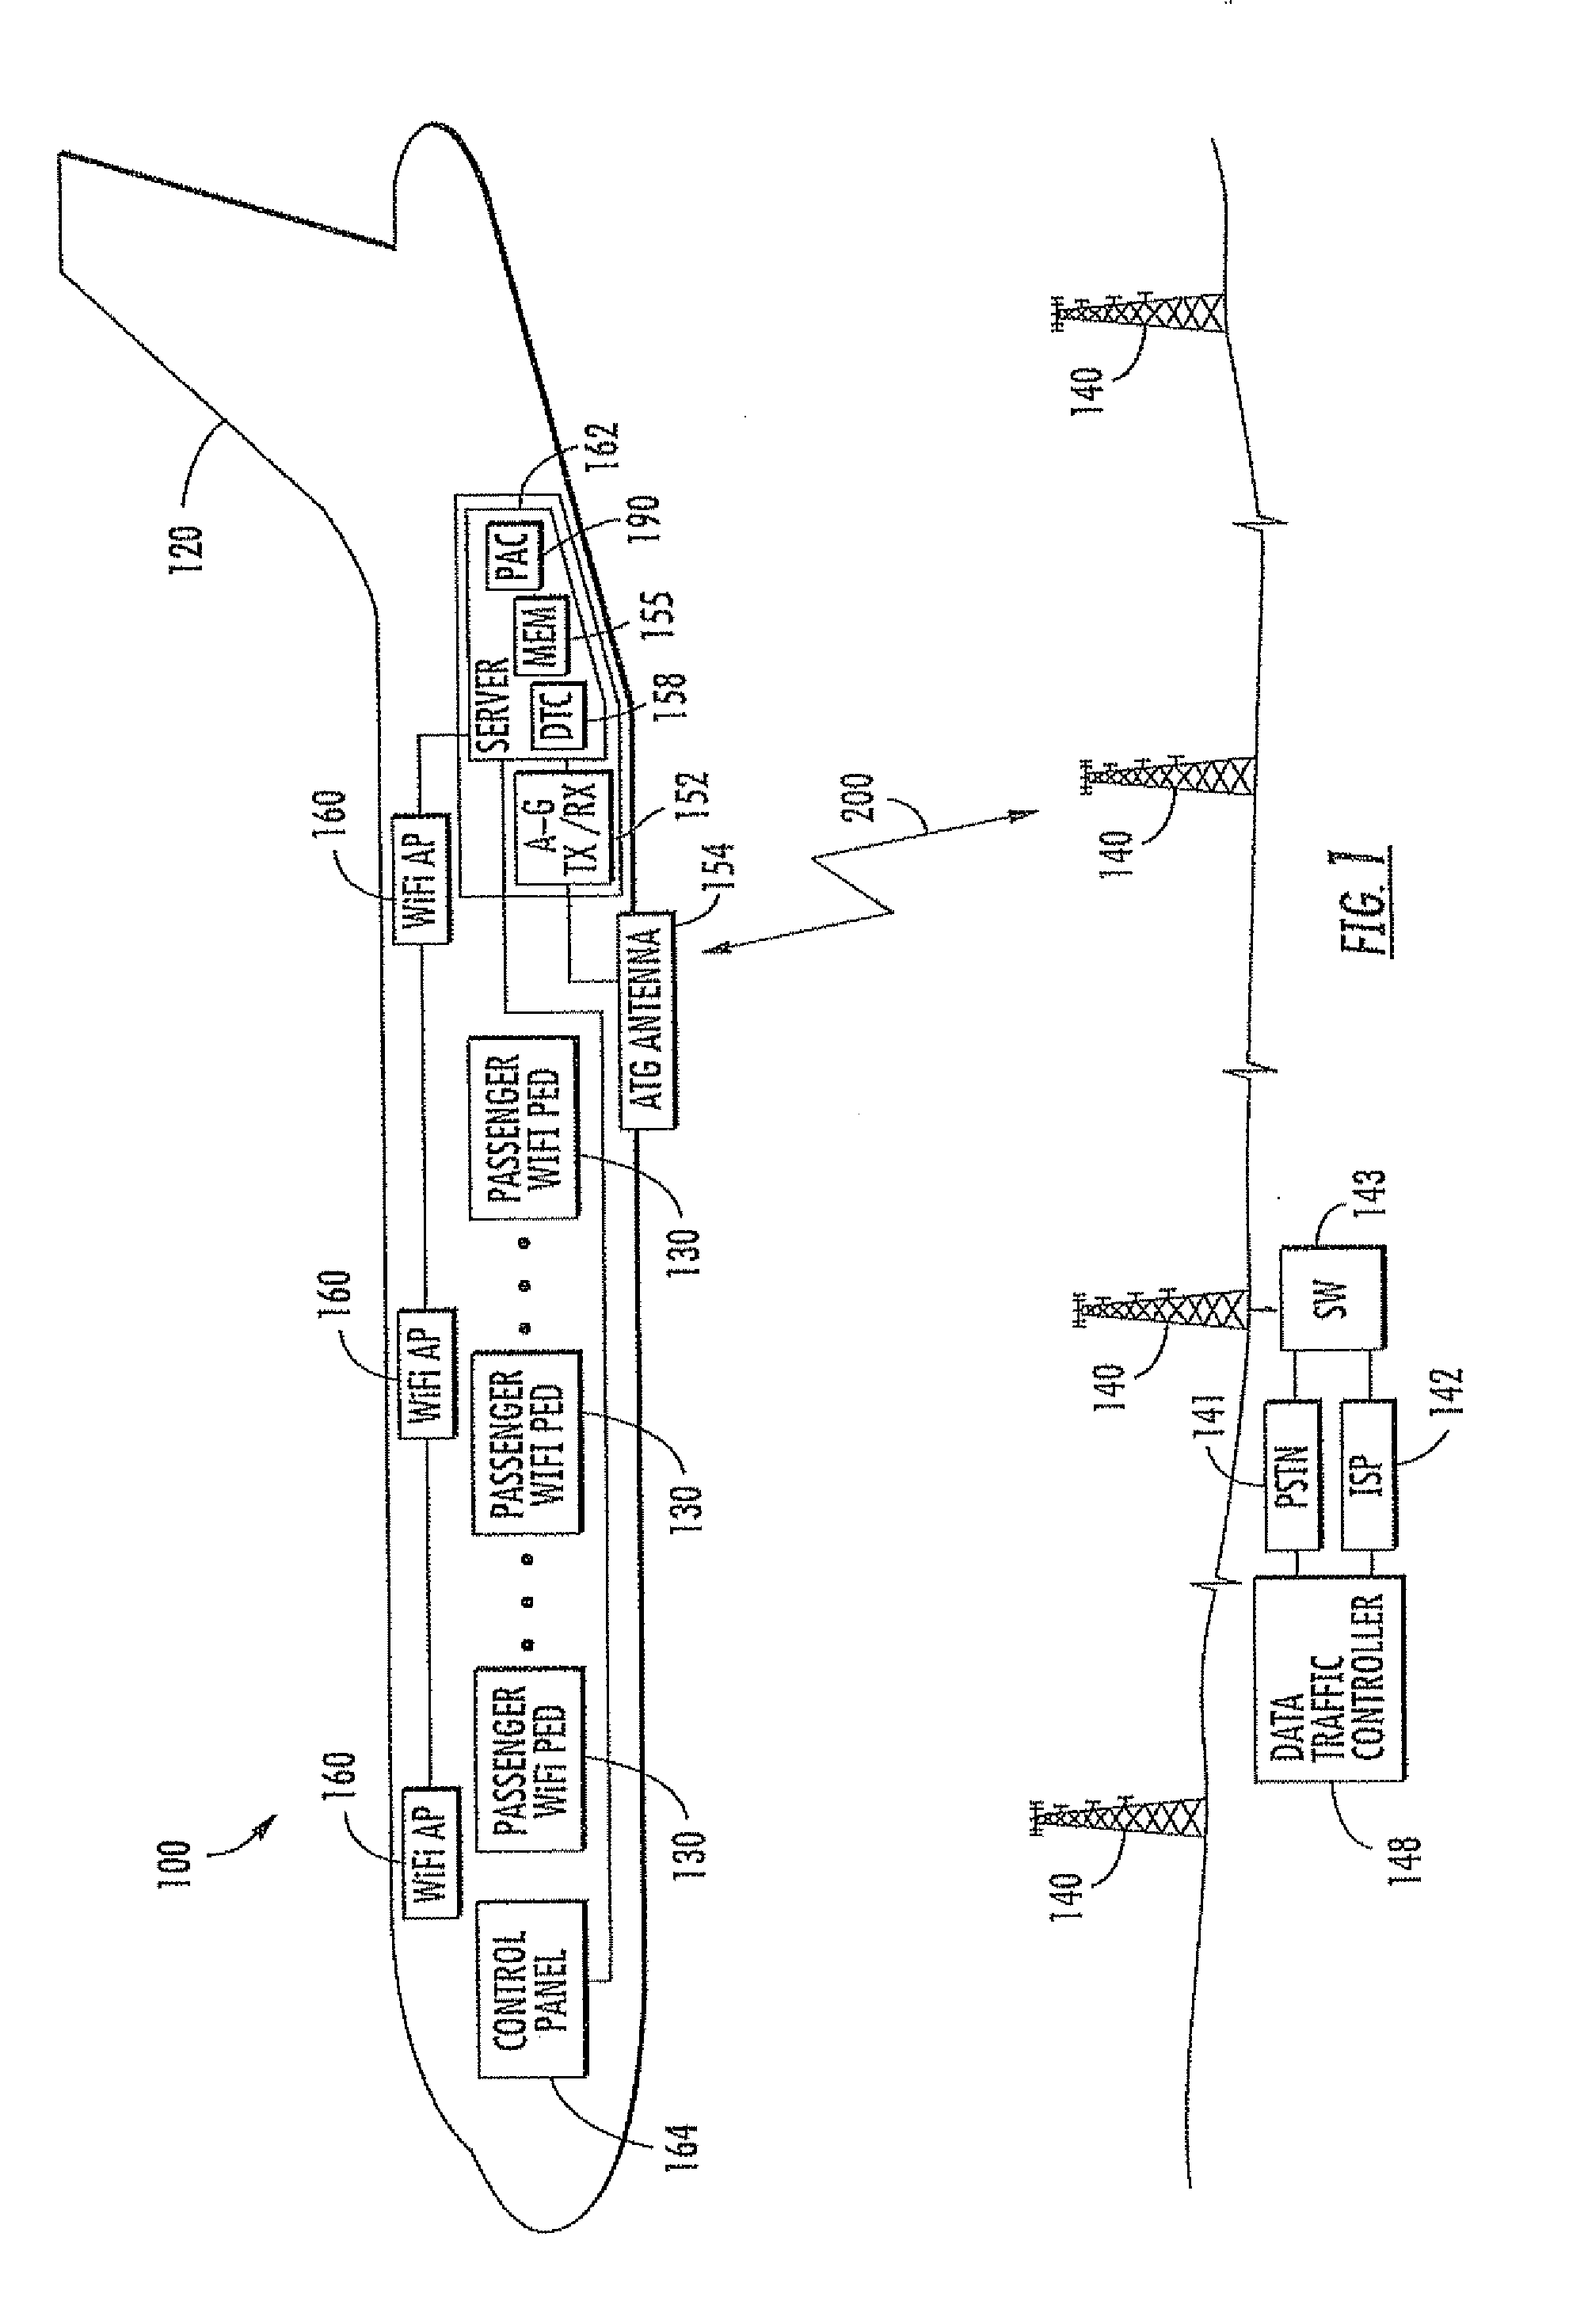 Aircraft communications system with video file library and associated methods